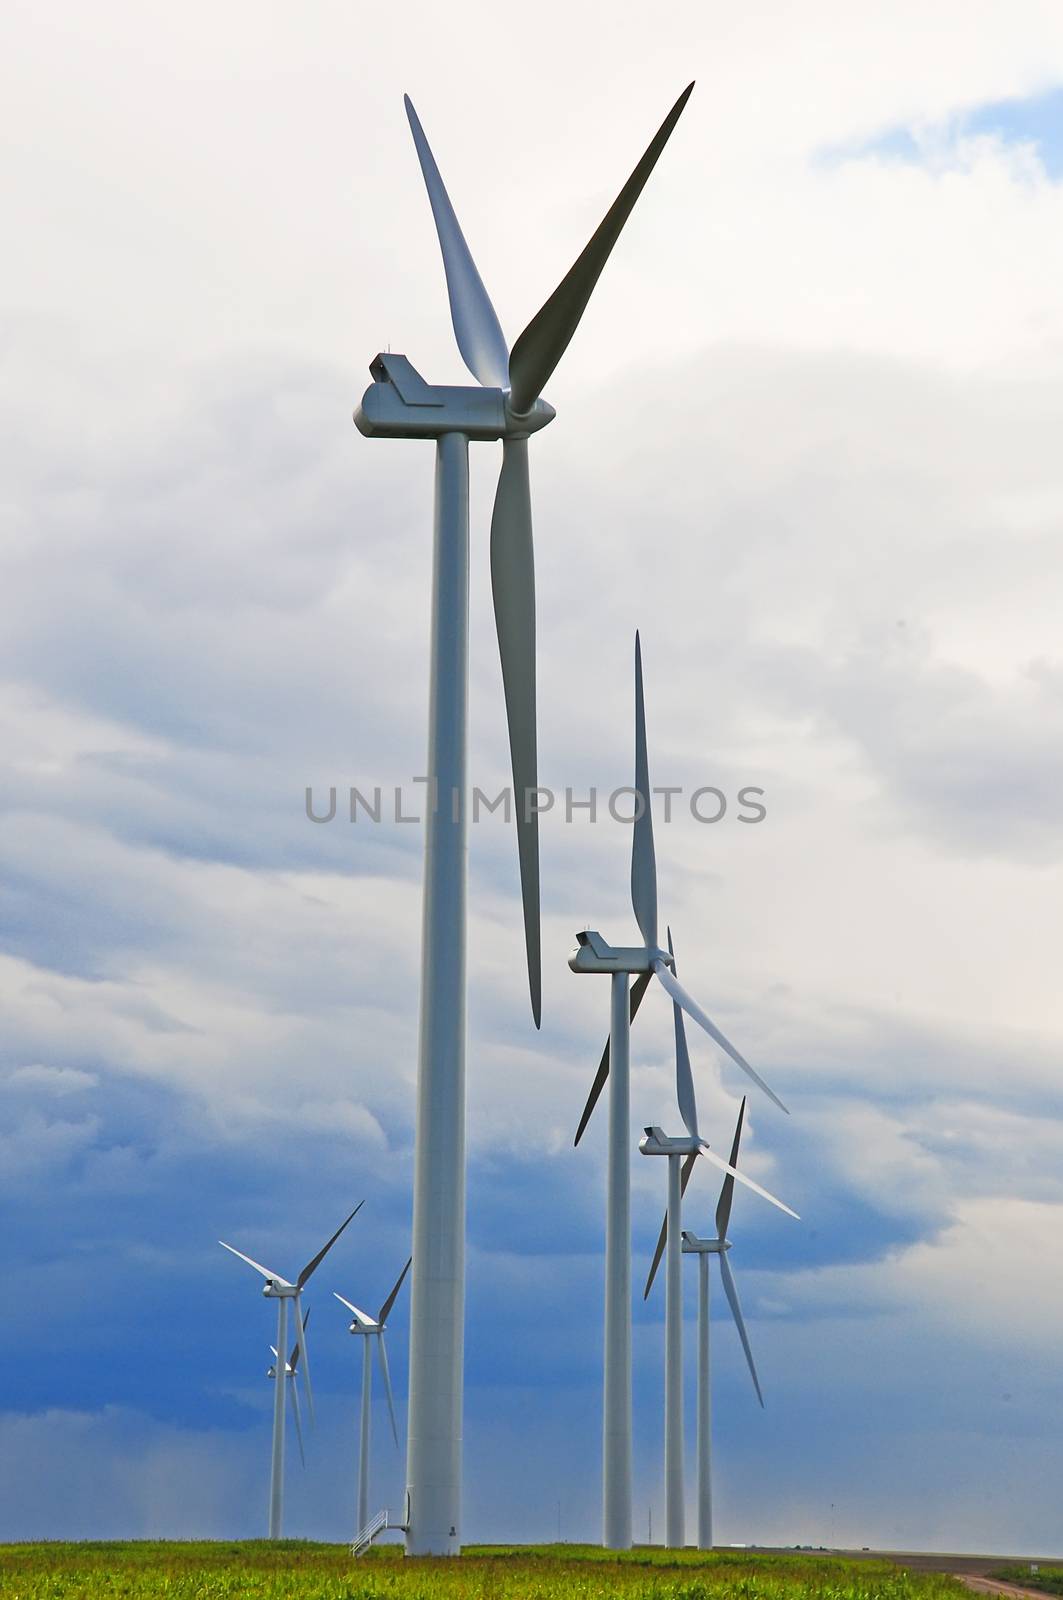 Row Of Wind Turbines by rcarner